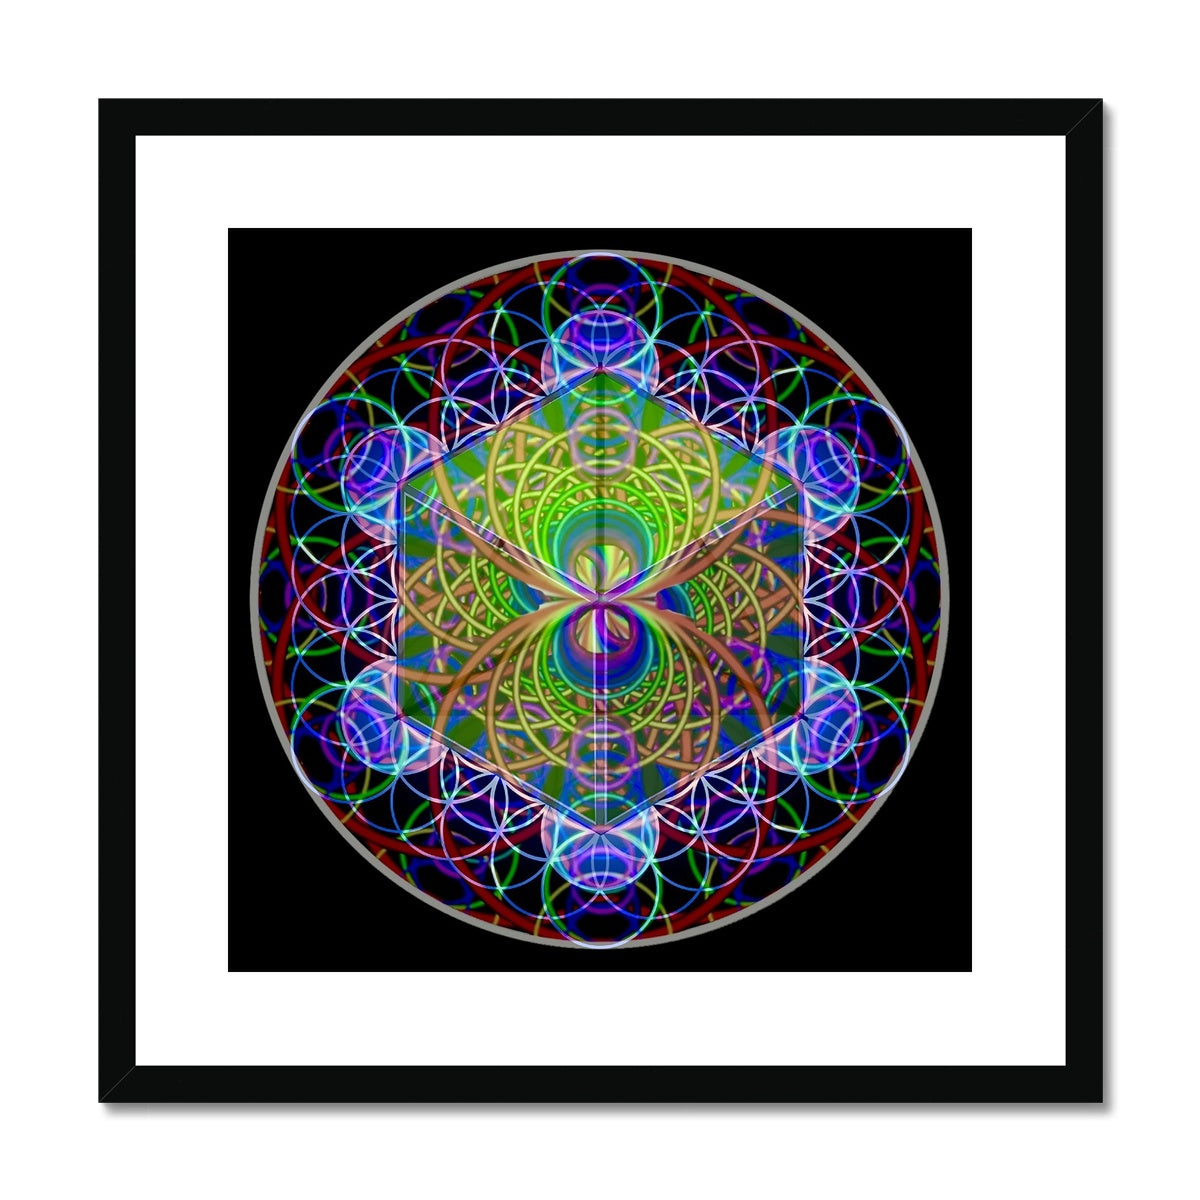 The Platonic Solid Cube with Inverted Sound waves Framed & Mounted Print